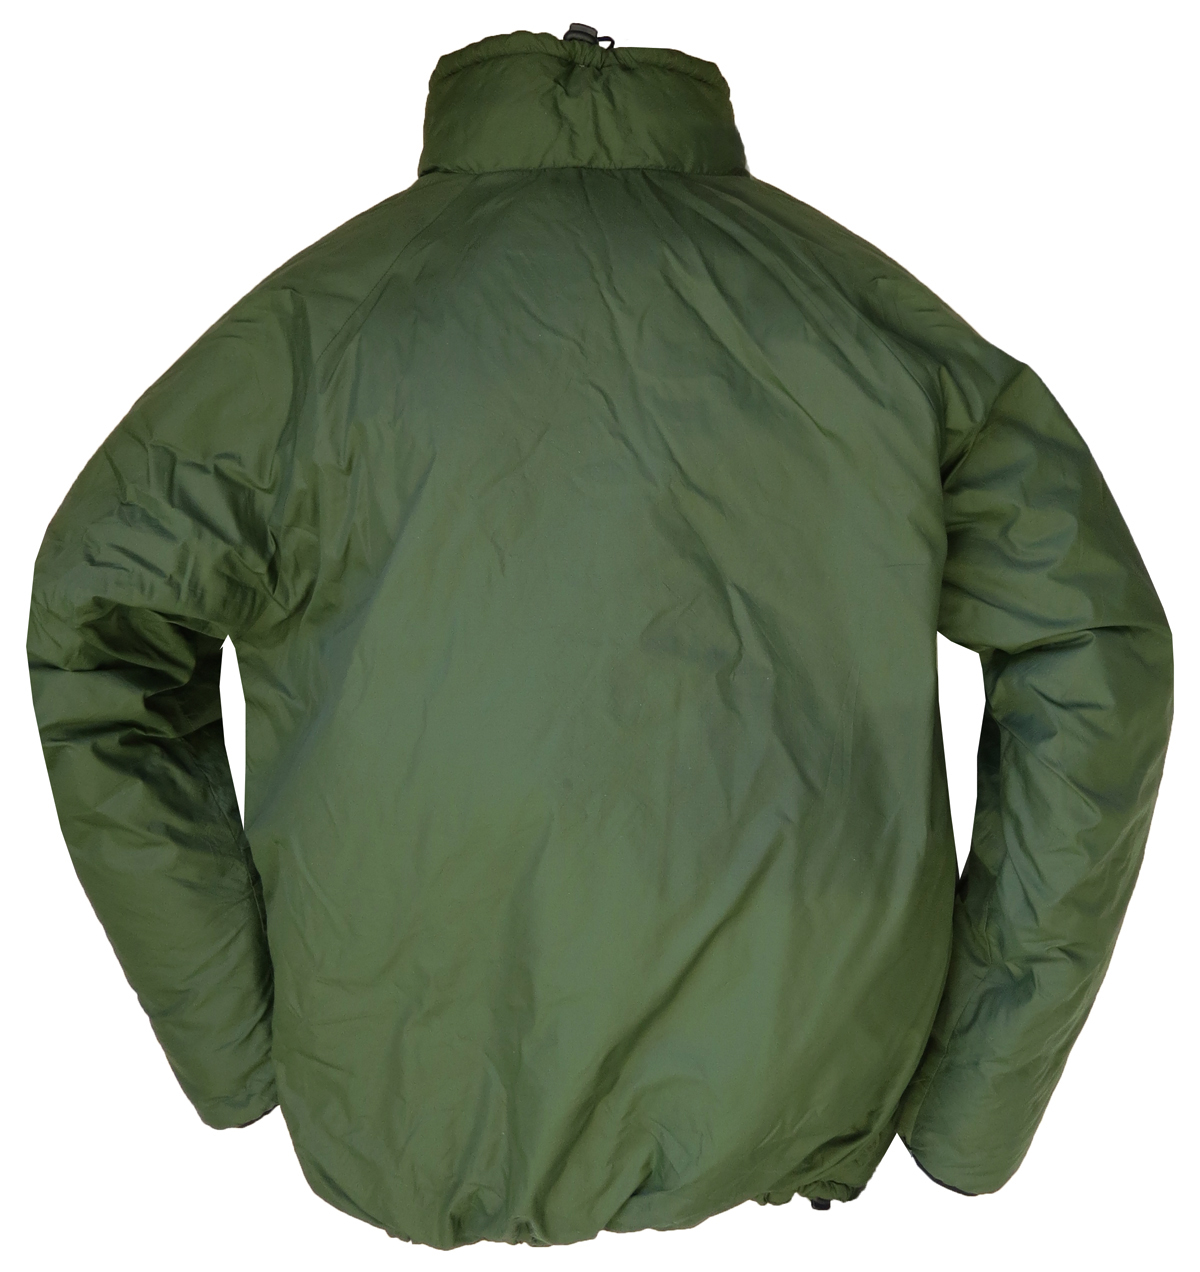 British Army Reversible Thermal Softie Jacket